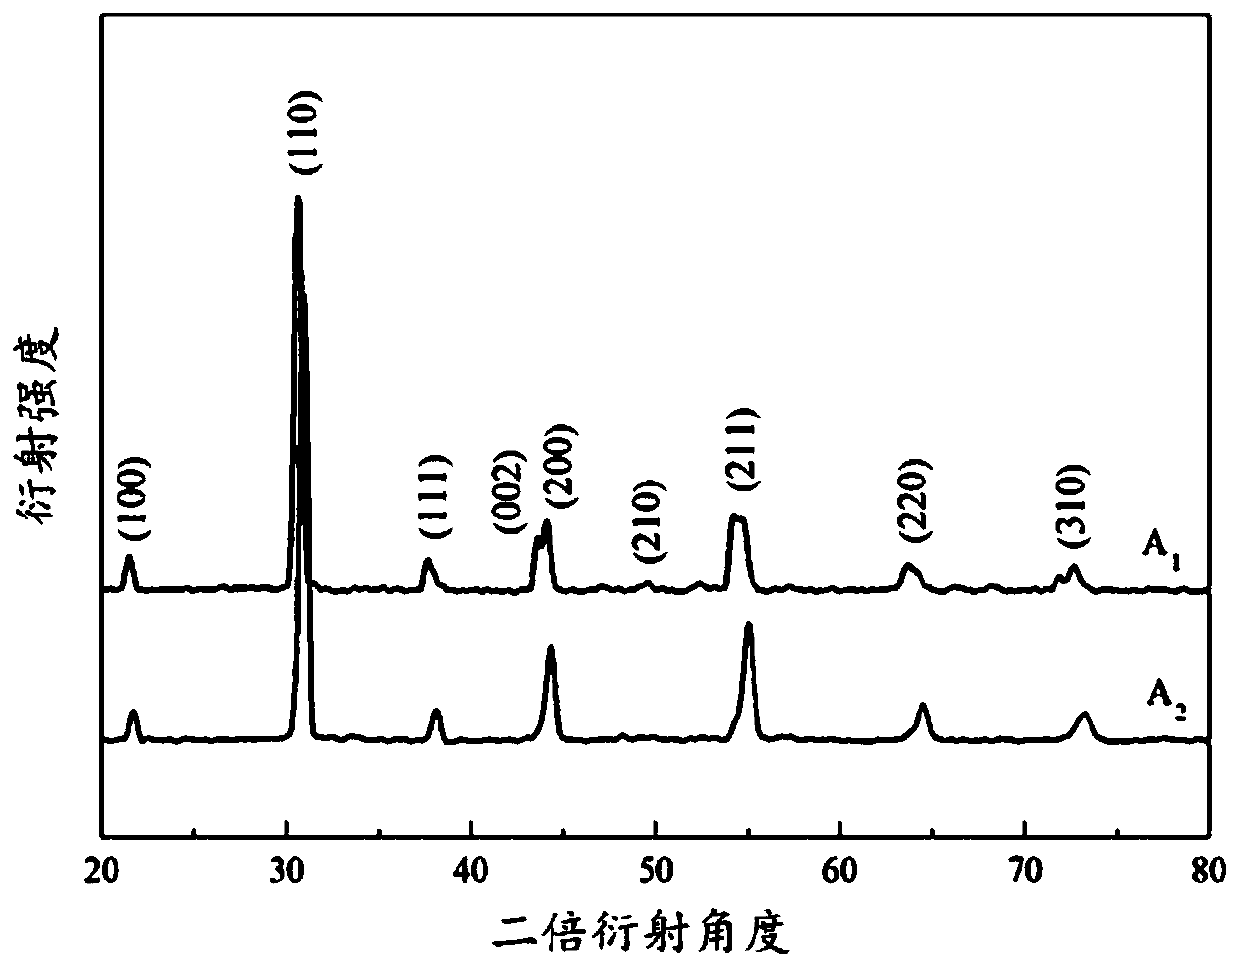 Strontium-doped lead lanthanum zirconate stannate titanate relaxed anti-ferroelectric thick-film ceramic as well as preparation method and application thereof